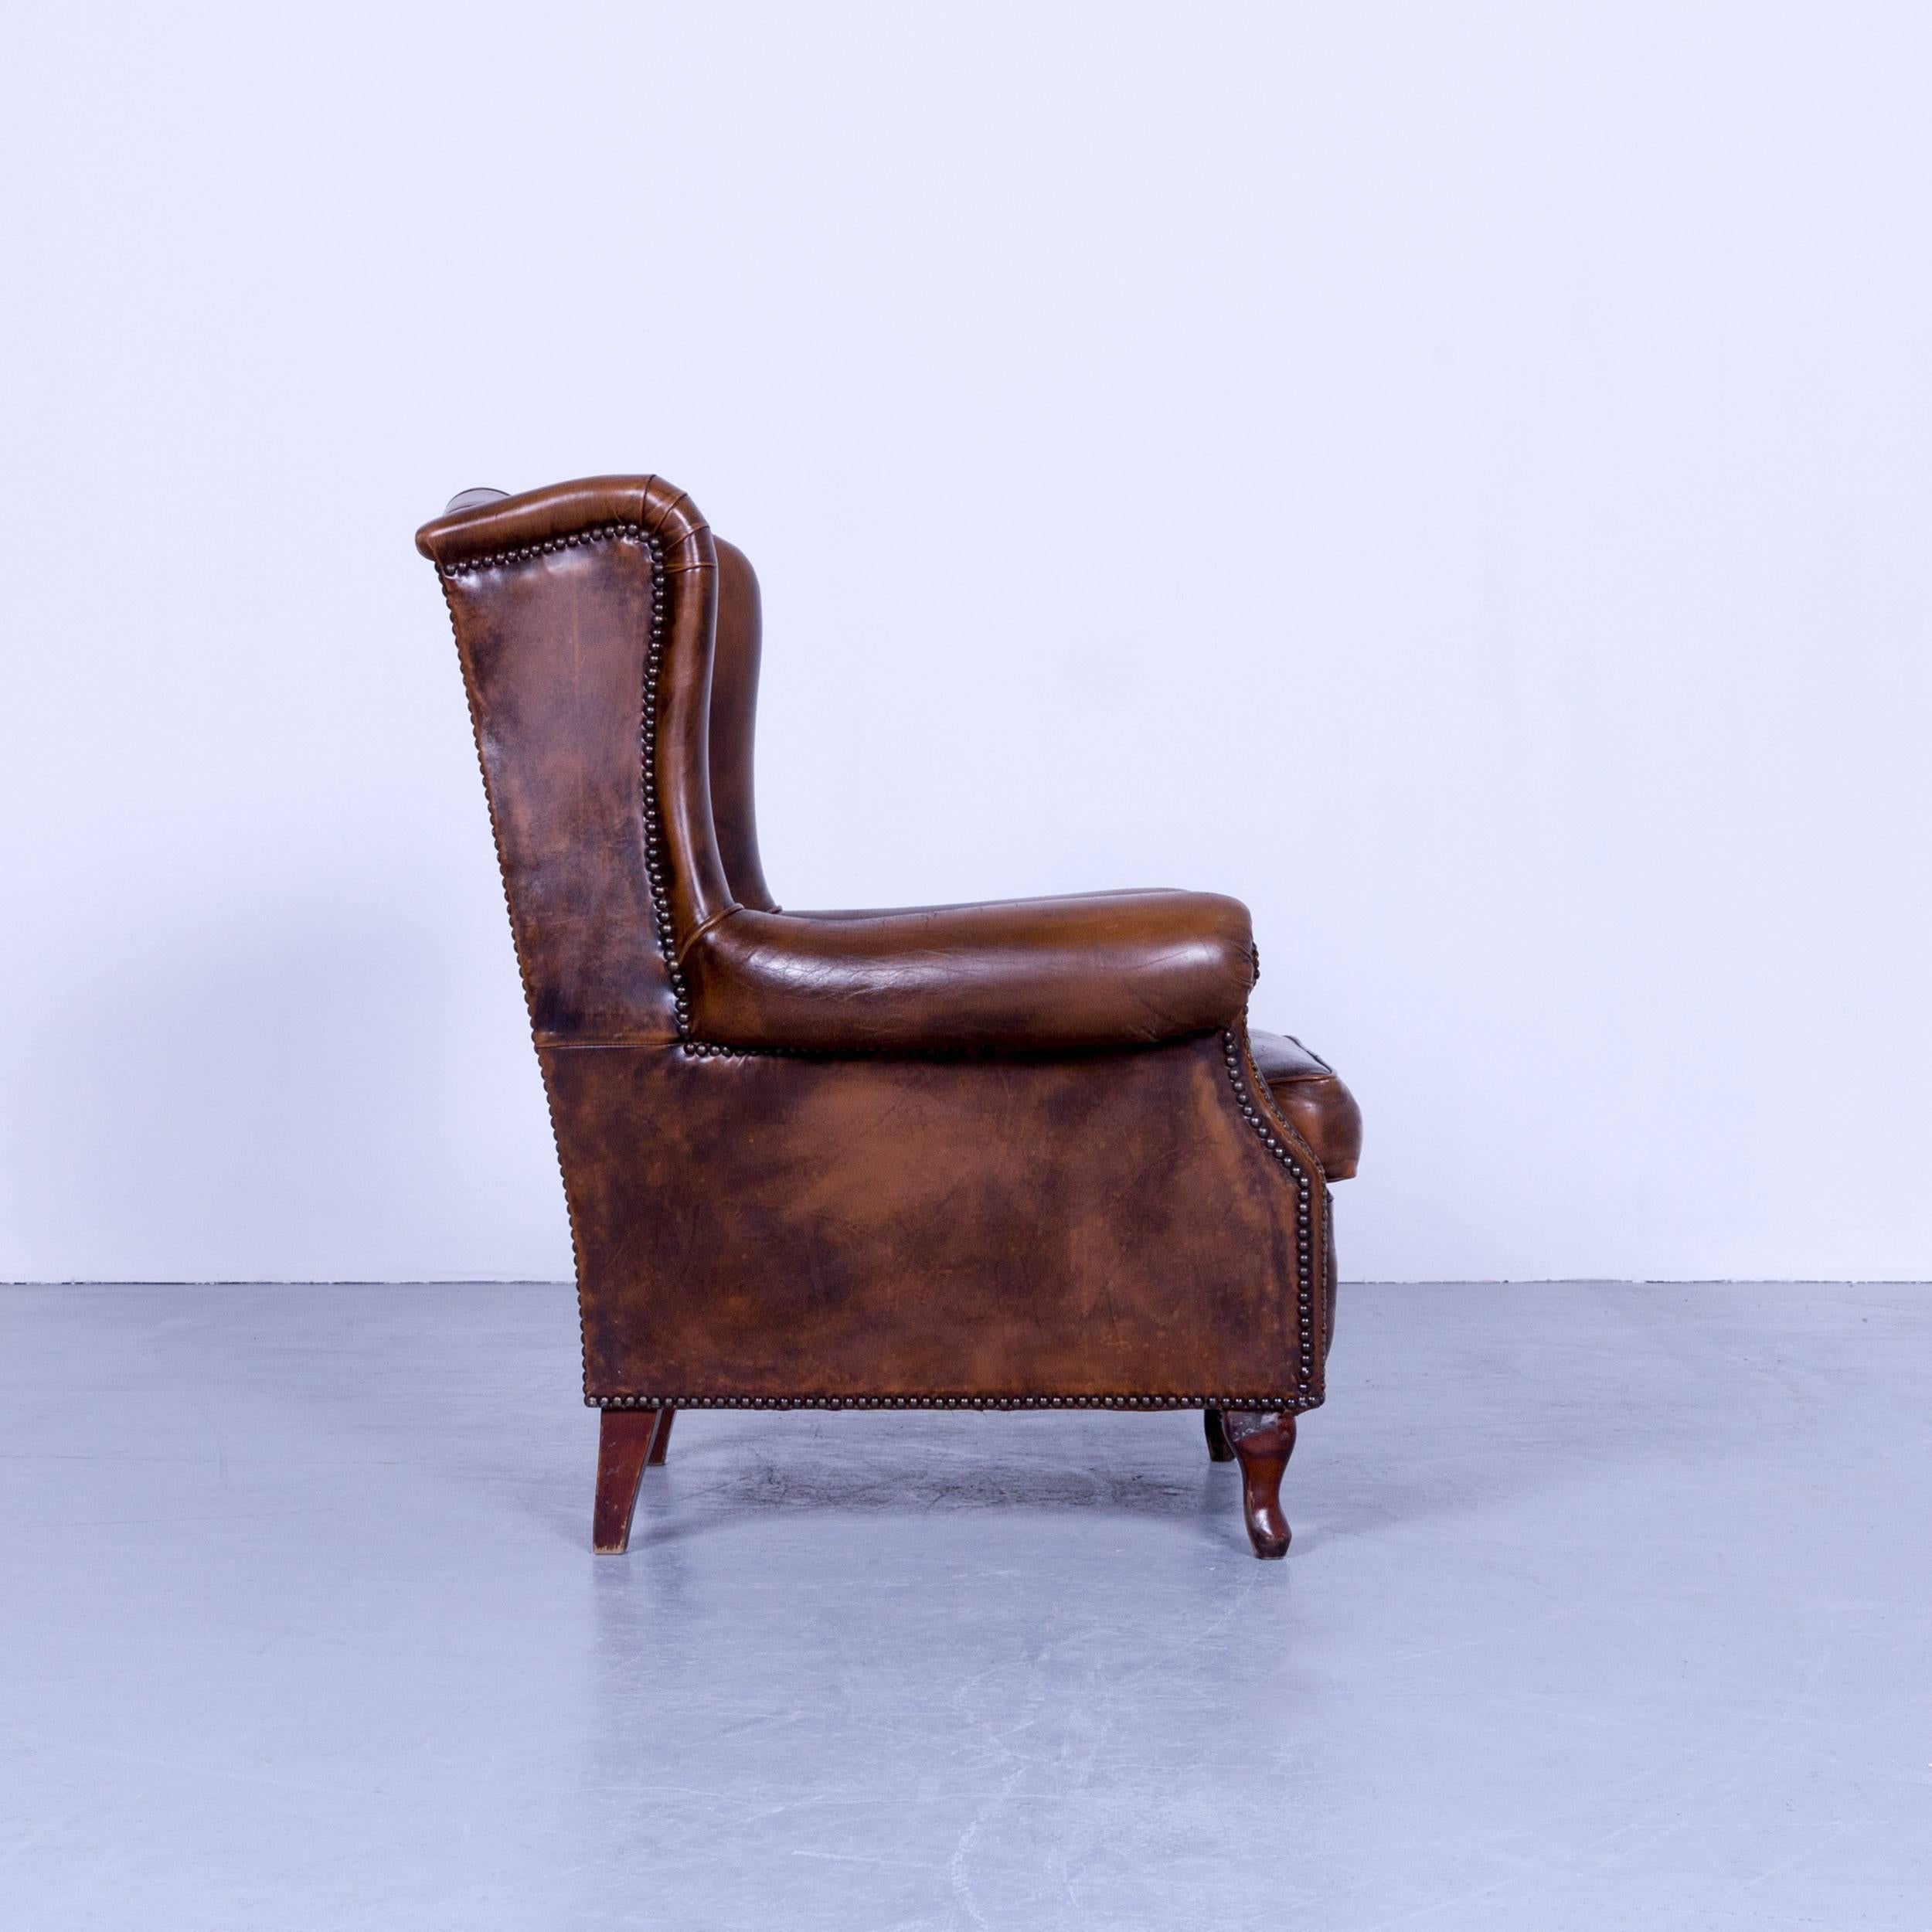 Chesterfield Armchair Brown Cocker Leather Buttoned Vintage Retro Wood Handmade For Sale 2